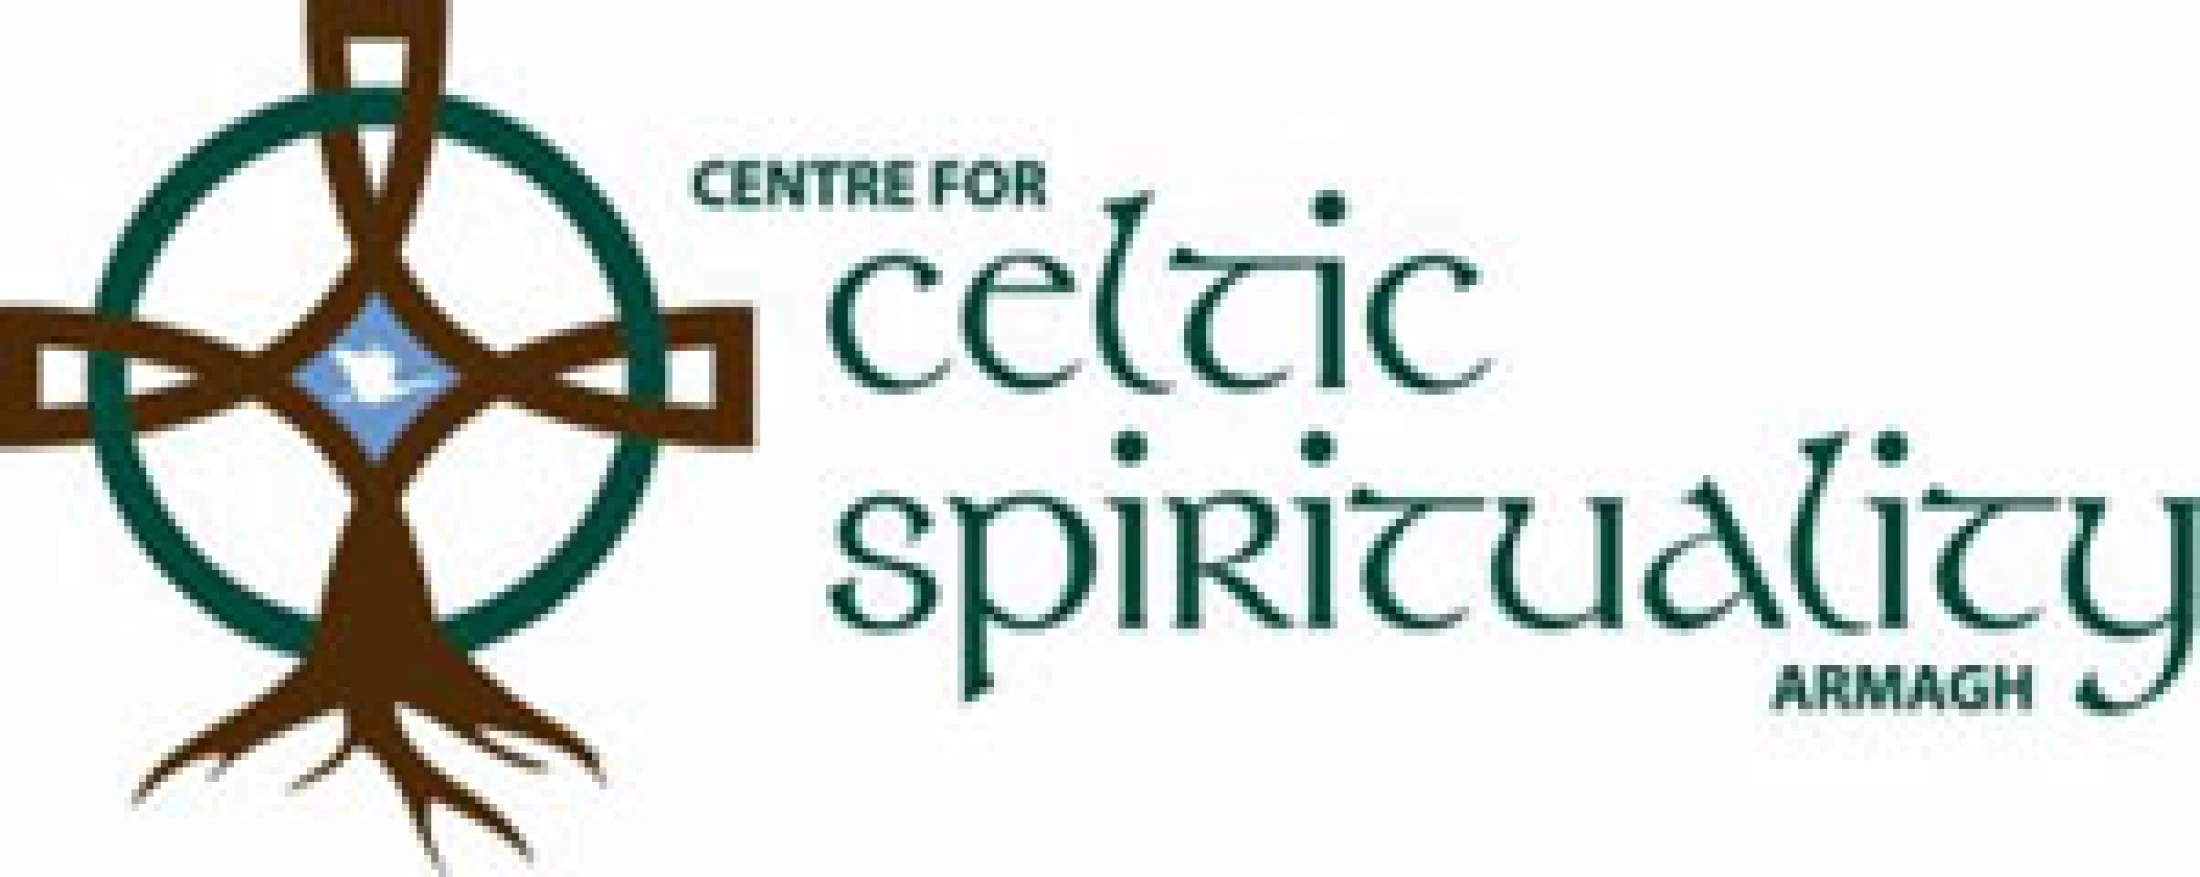 Centre for Celtic Spirituality, Armagh, moves to The Navan Centre